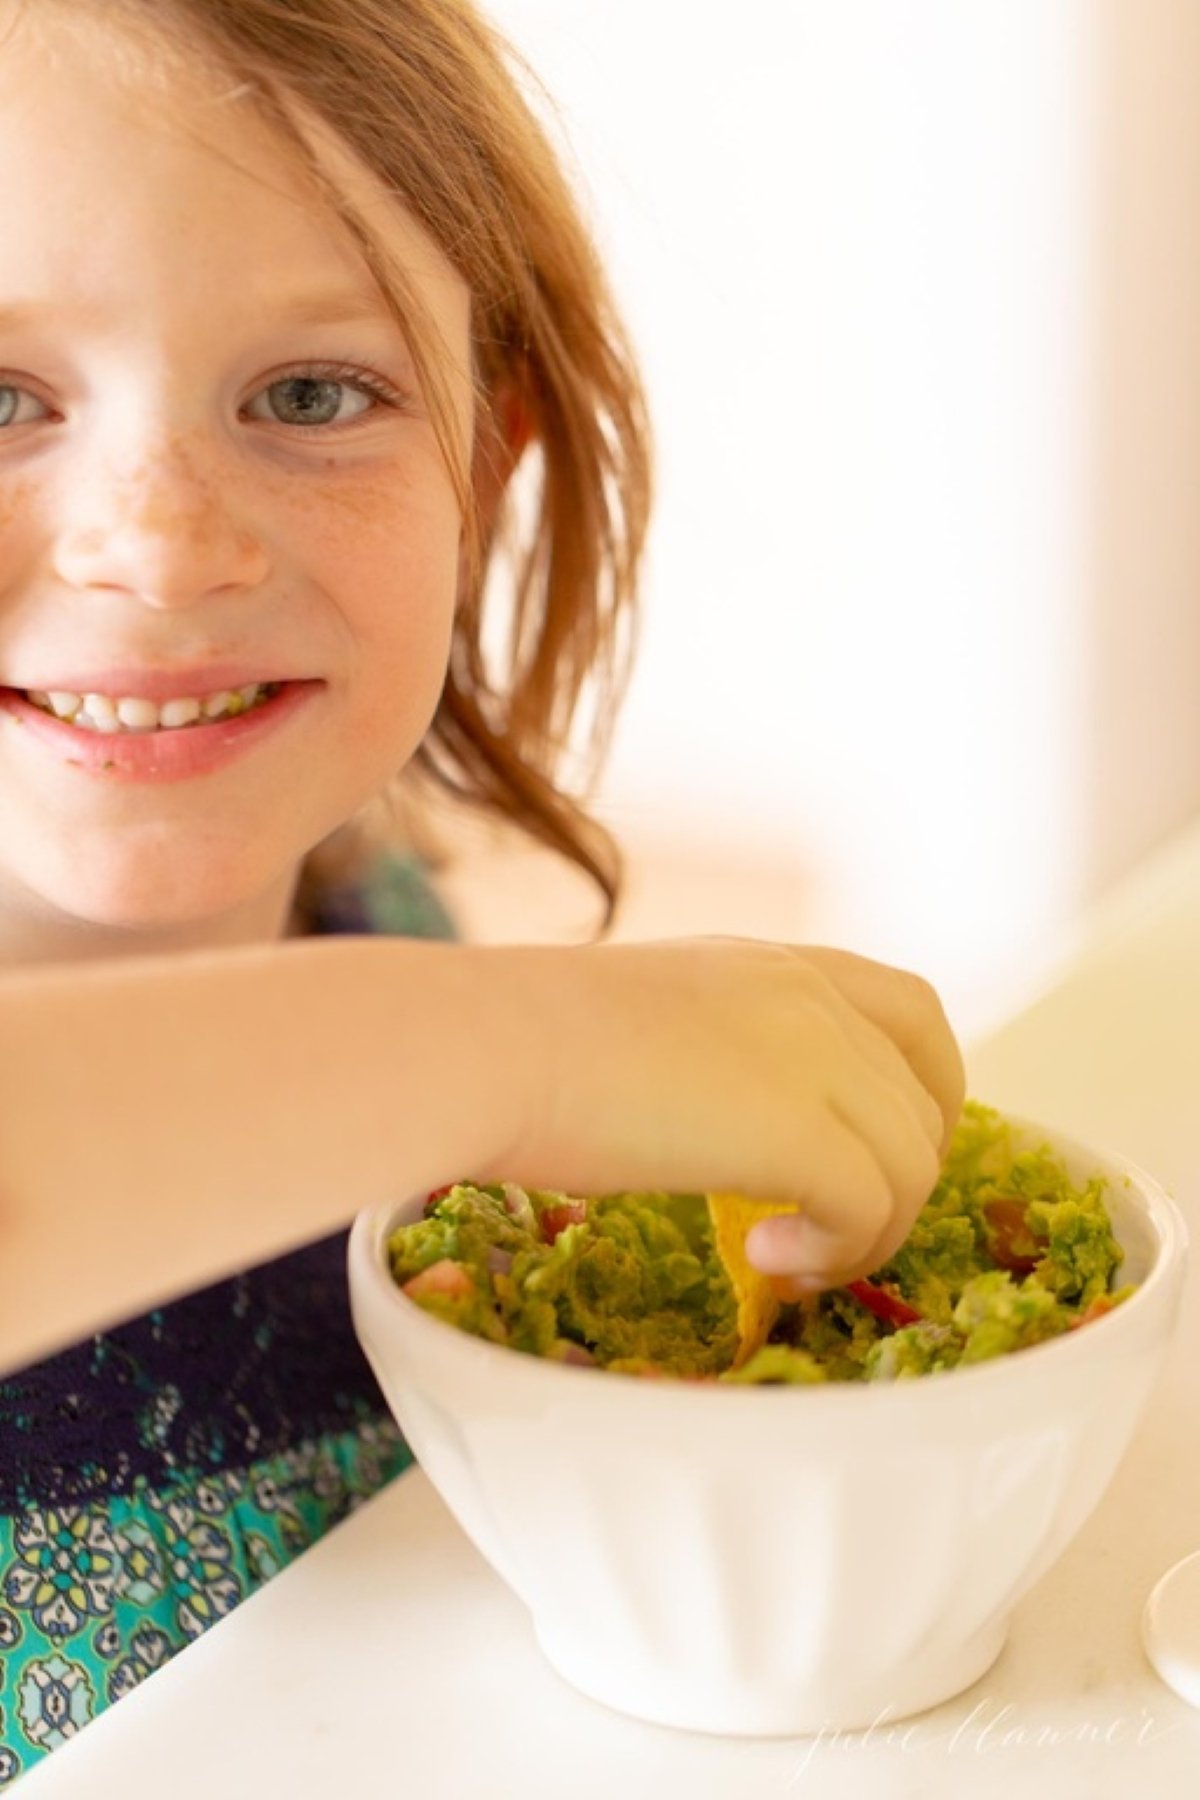 A little girl dipping a chip into a bowl of guacamole.